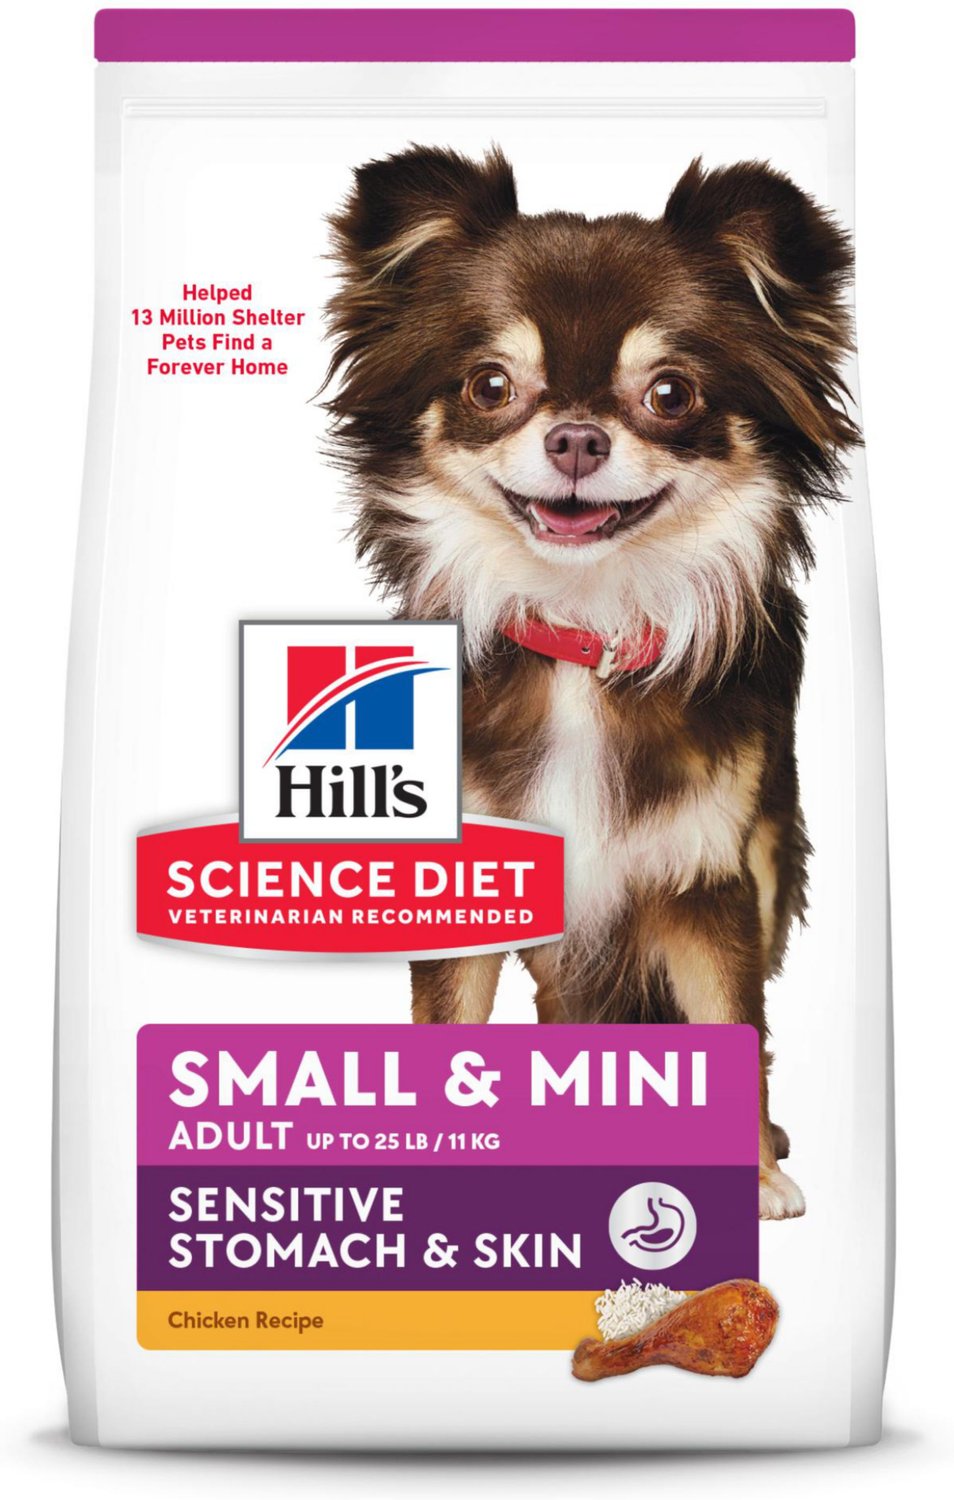 Hill's Science Diet Adult Sensitive Stomach & Skin